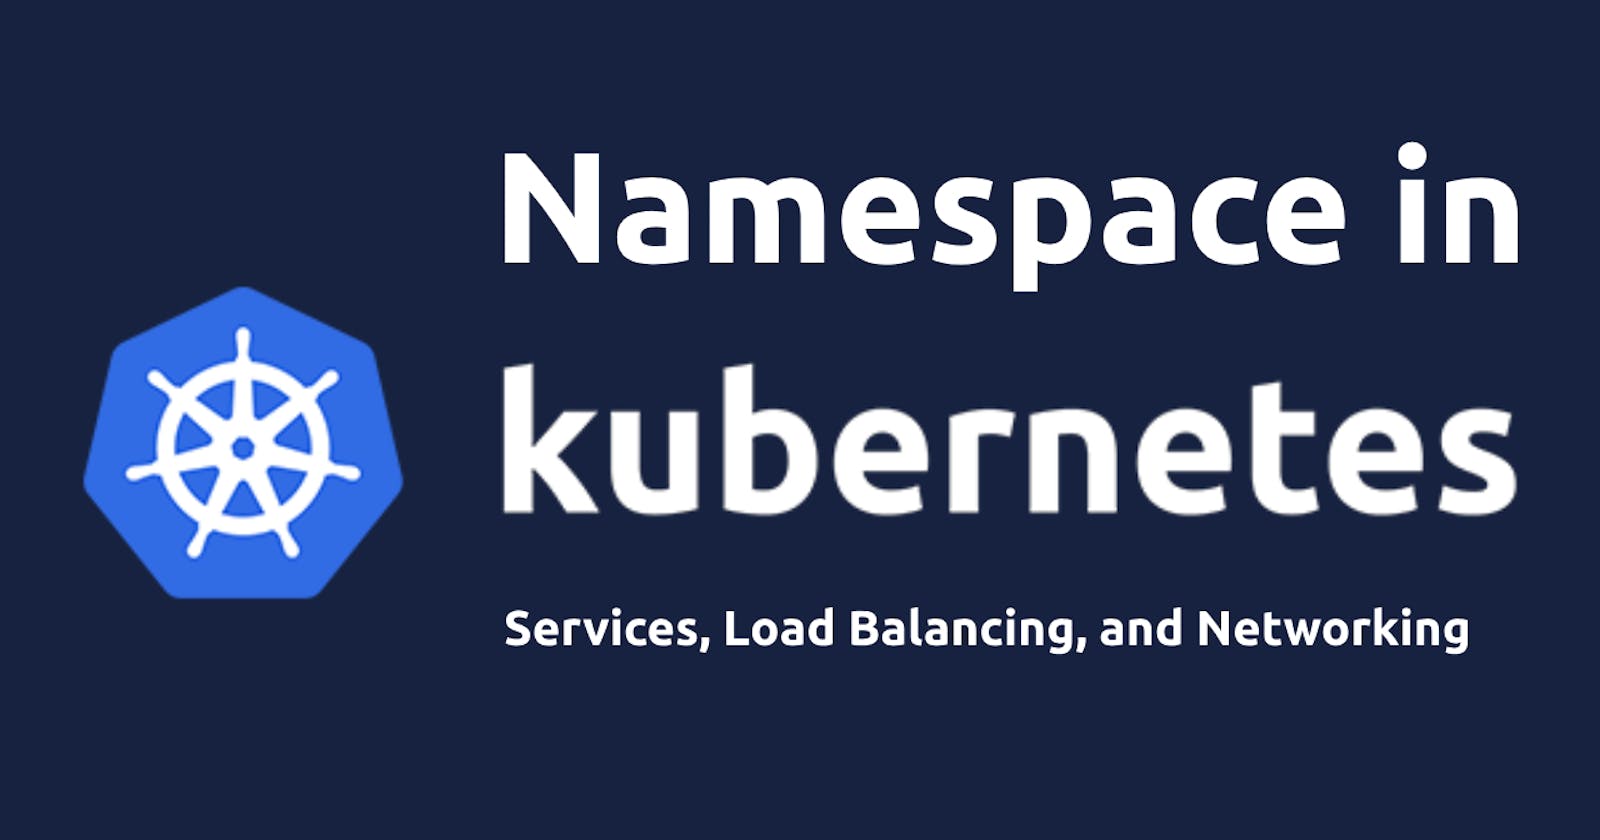 Namespaces and Services in k8s